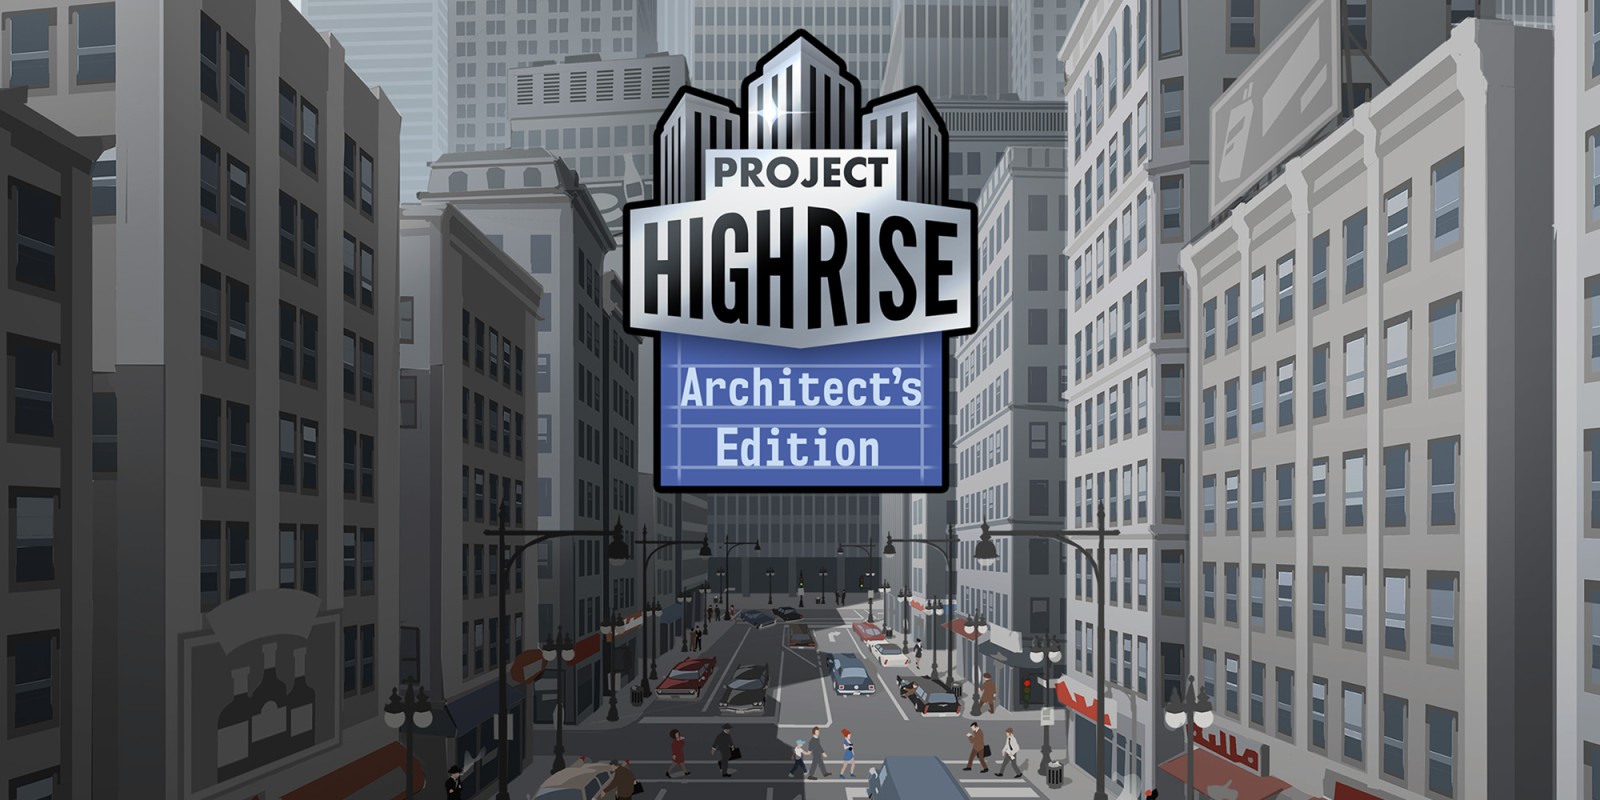 Project highrise architect